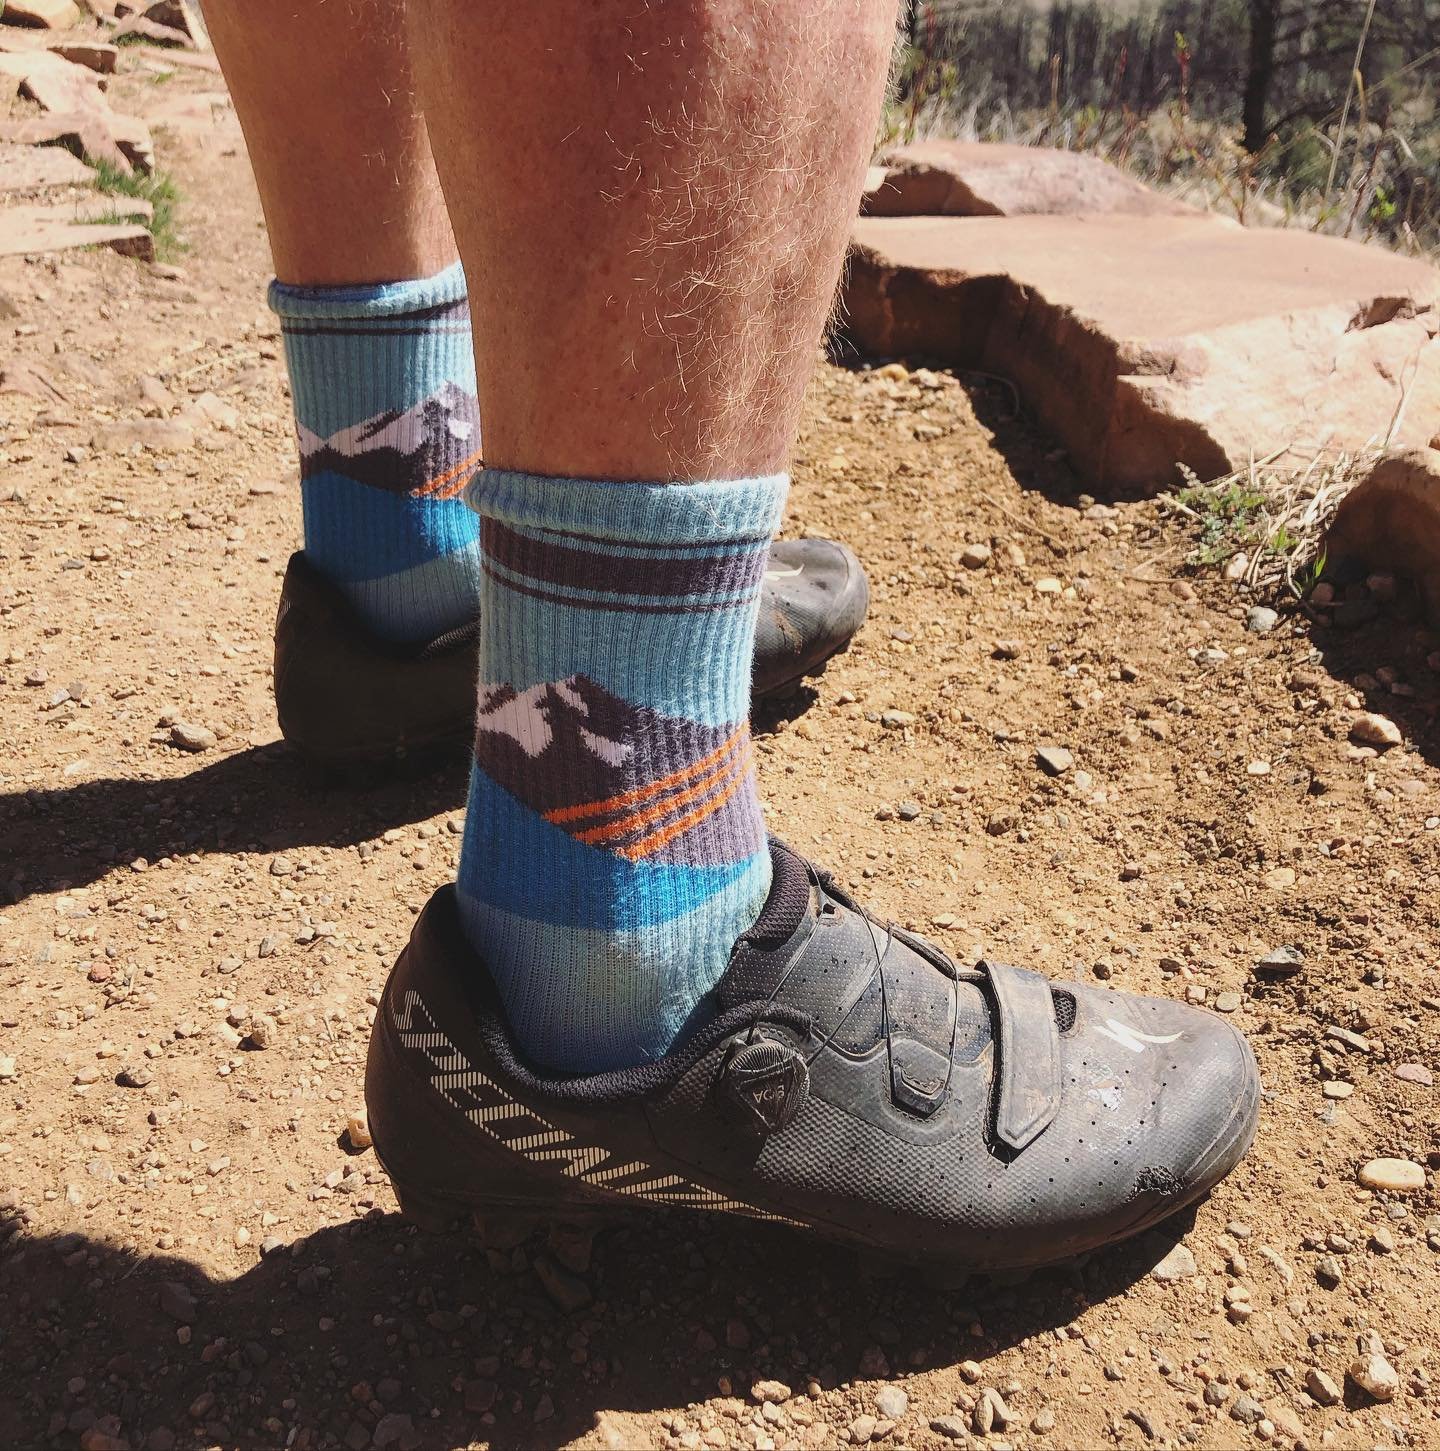 BBP sock sighting 👀
We ❤️custom socks for sooo many reasons:
1. One size fits most 
2. Made in 🇺🇸
3. Fast production time
4. Unique design possibilities 
5. Constant brand exposure 

#customsocks #brandloyalty #comfort 
#conversationstarters #func